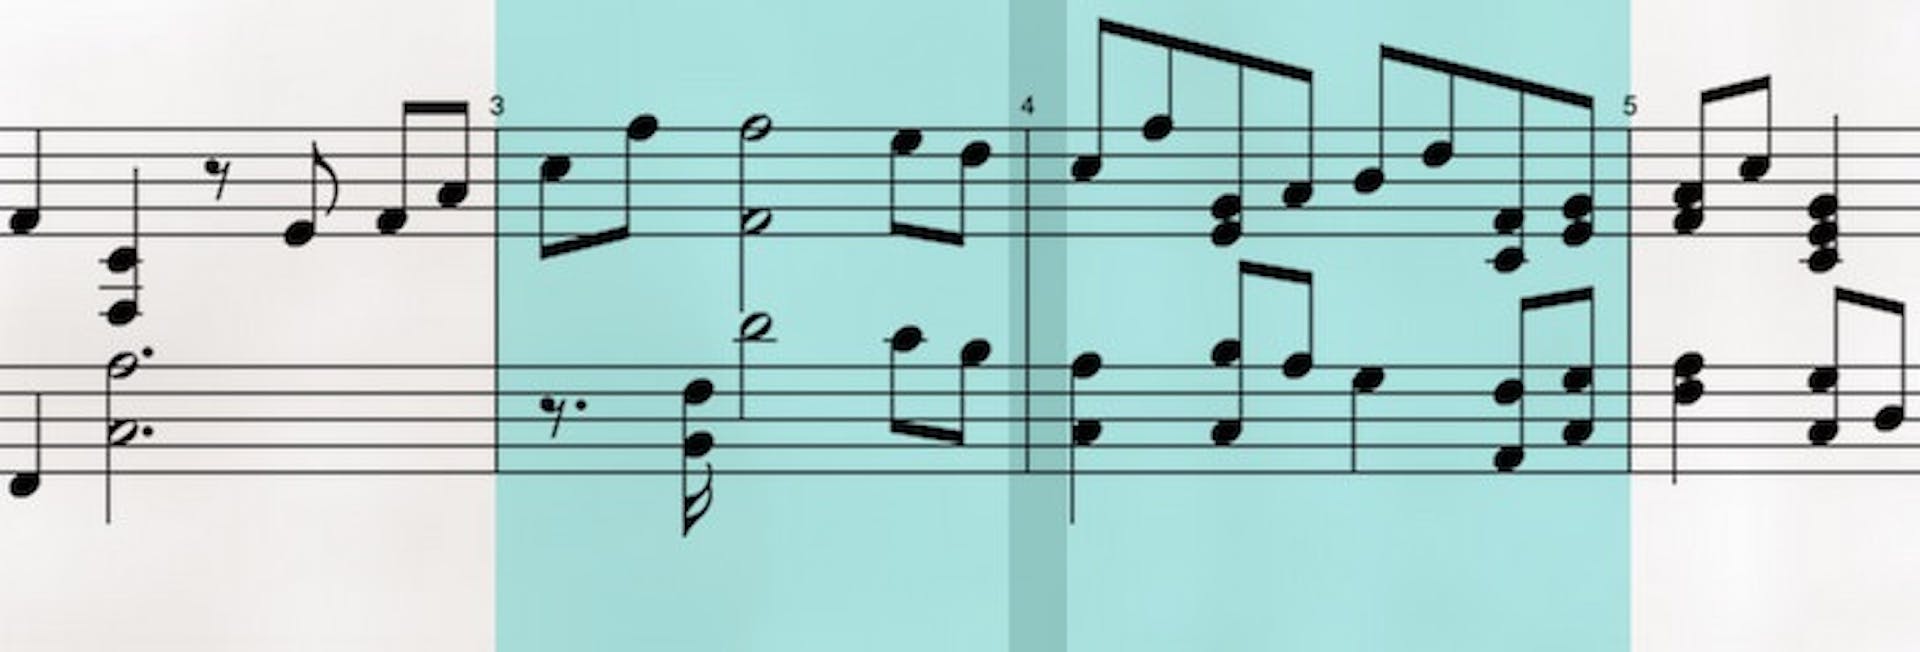 Song section in flowkey